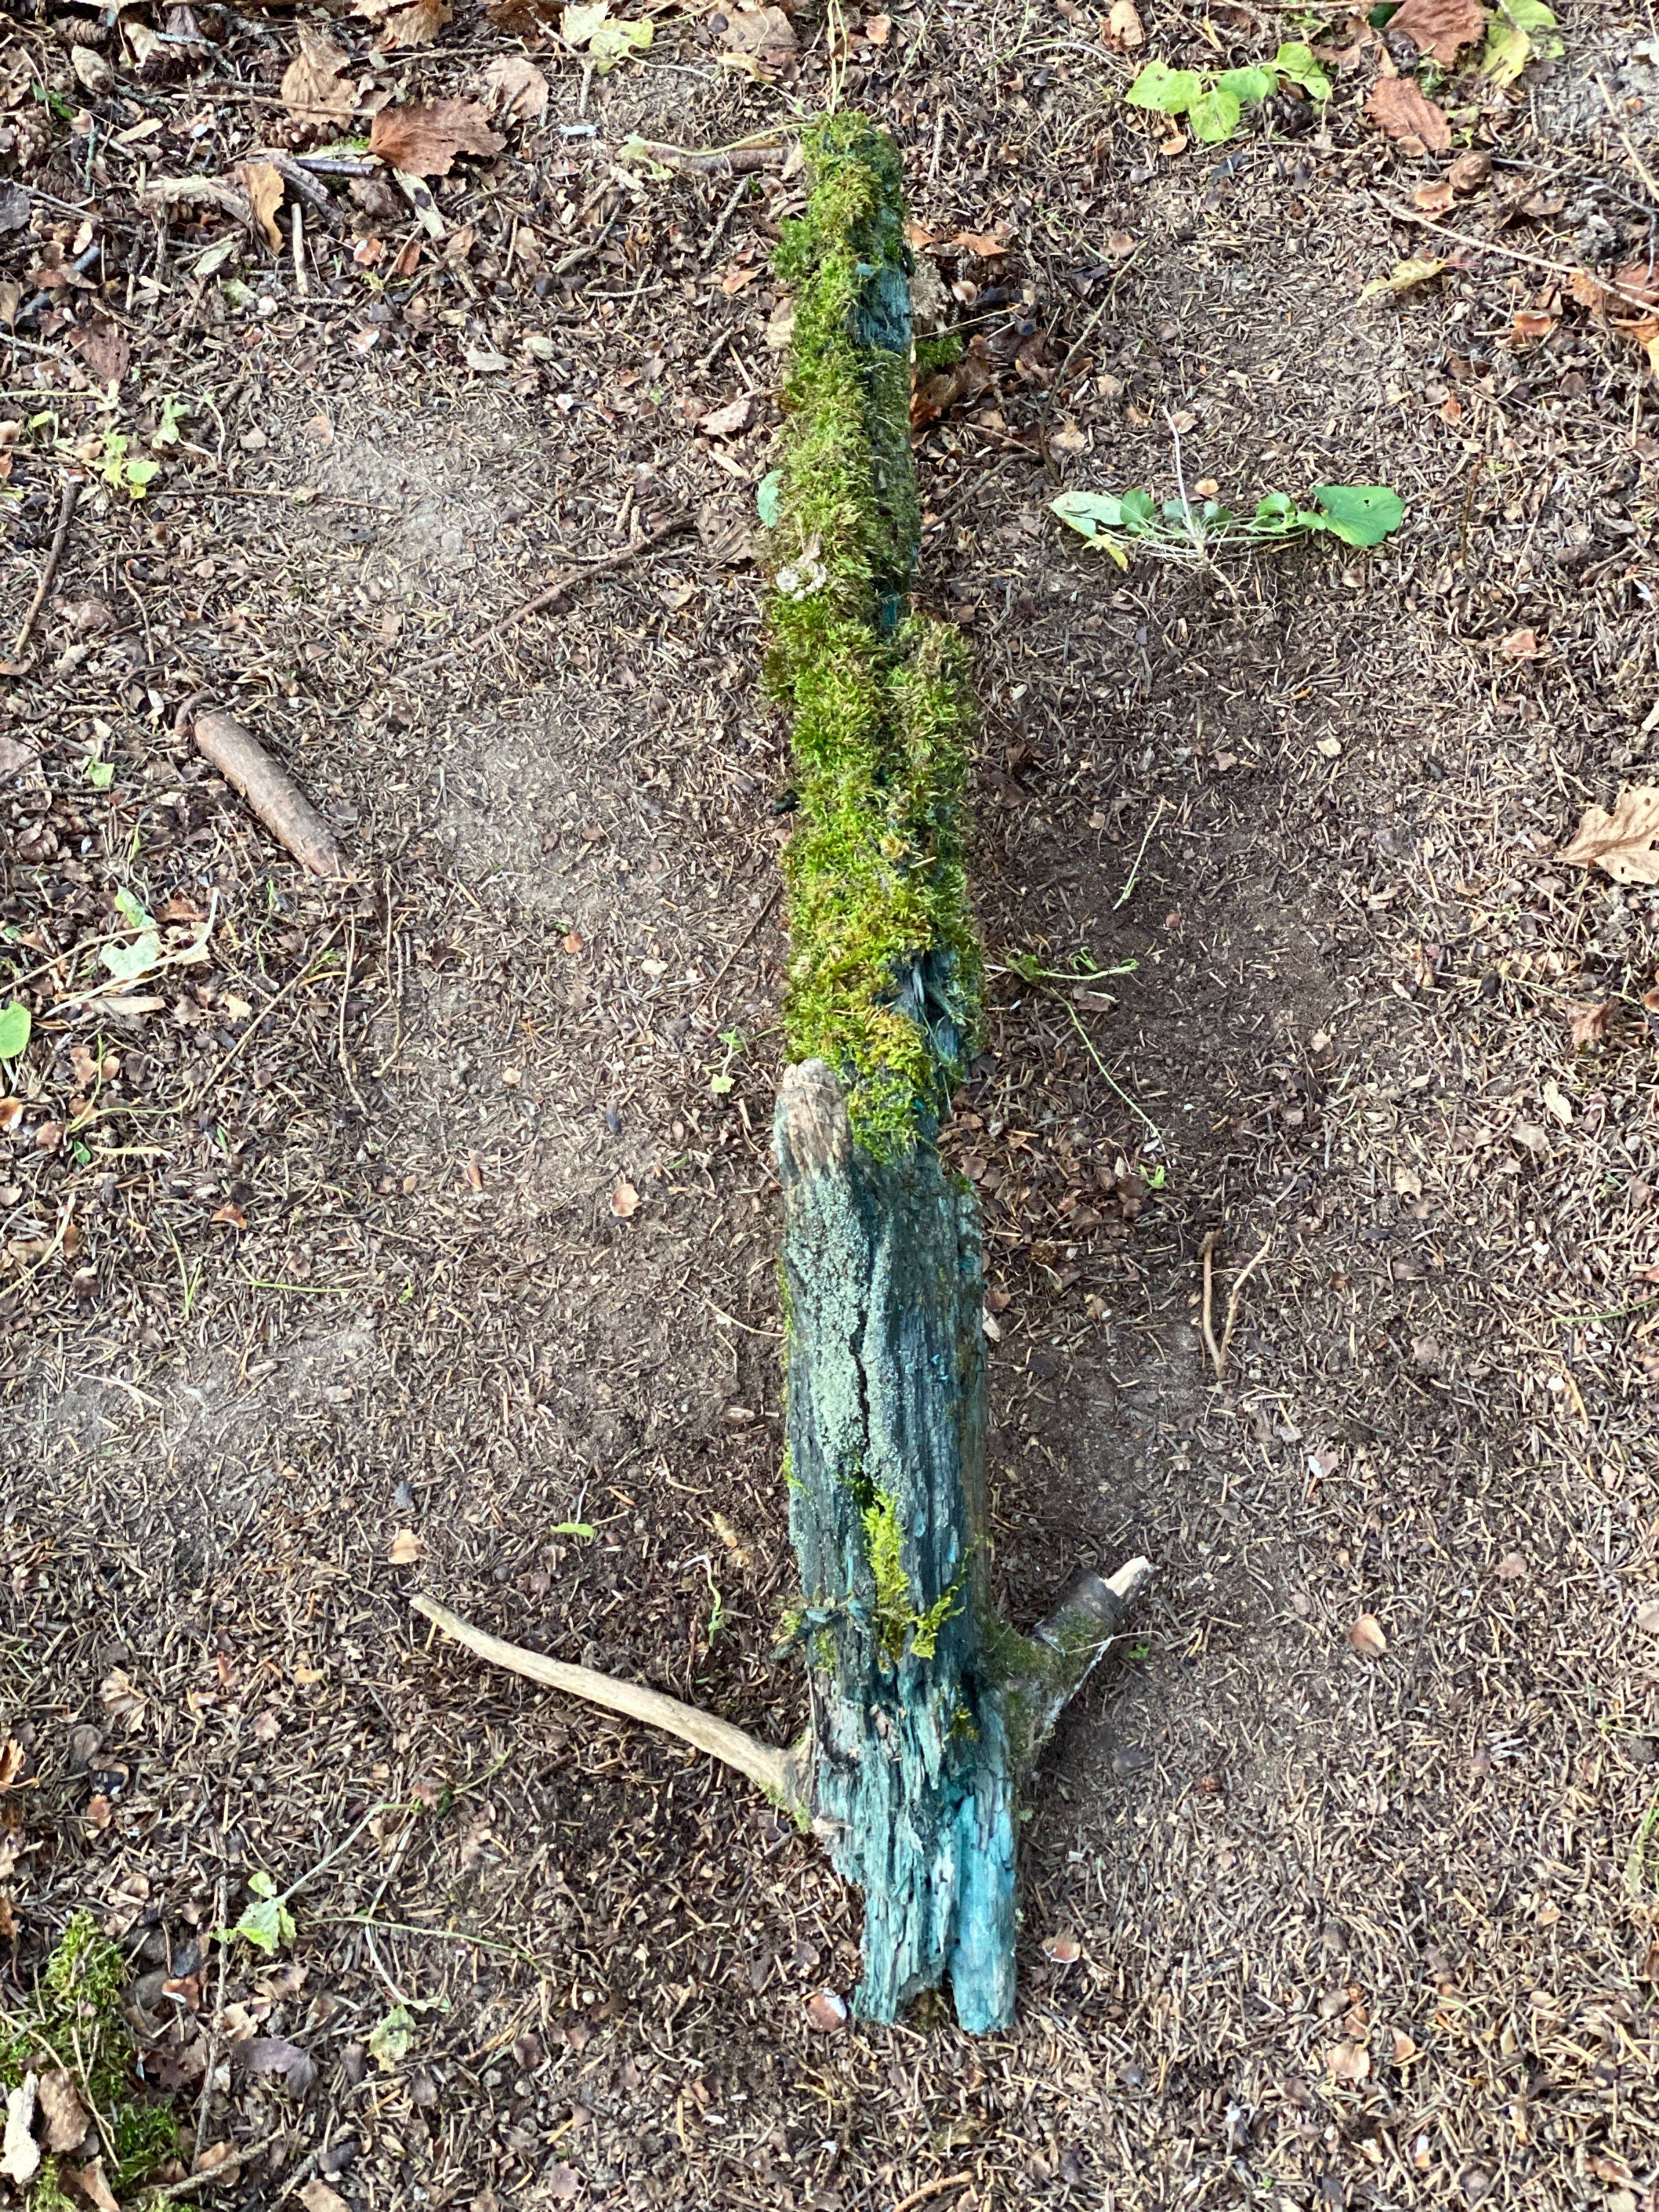 Live Moss on a Blue Colored Log, Mossy Log Approximately 31 Inches Long x 5 Inches Wide x About 3 Inches High